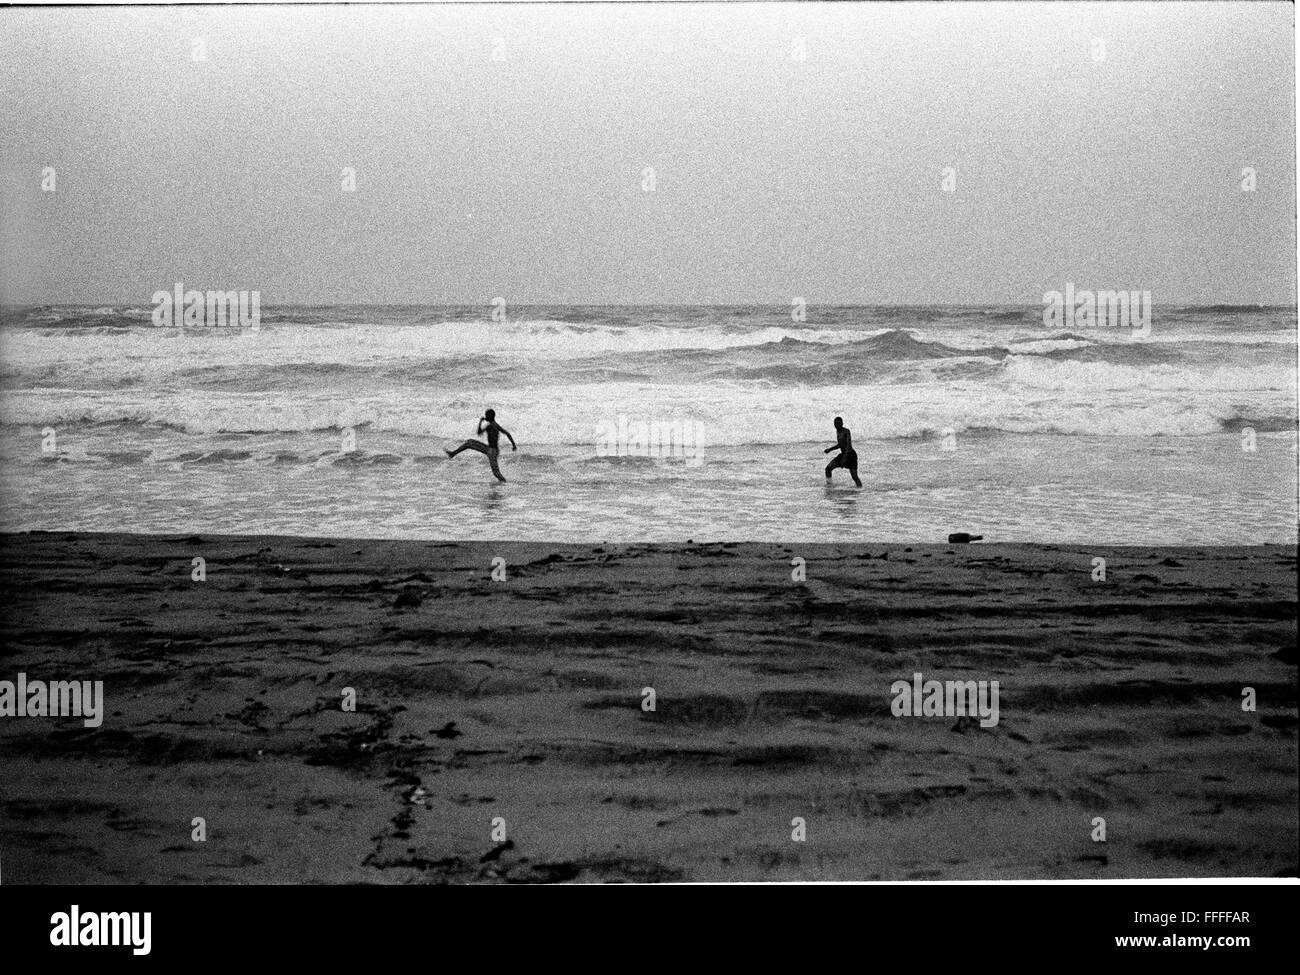 Jan 4, 2016 - South Beach, KwaZulu-Natal, South Africa - Two men running in the waves. South Beach is a part of the City of Durban's longest uninterrupted stretch of beach sand. The City of Durban is on the eastern seaboard of South Africa and the people here are washed with the warm waters of the Indian Ocean. To the north of this stretch of sand are beaches with cafe society hang outs. To the south there is a pier with the upmarket Moyo's Restaurant at it's end and the uShaka Marine World complex and the private surf and sea clubs of the Vetches Beach area. Between these northern and souther Stock Photo